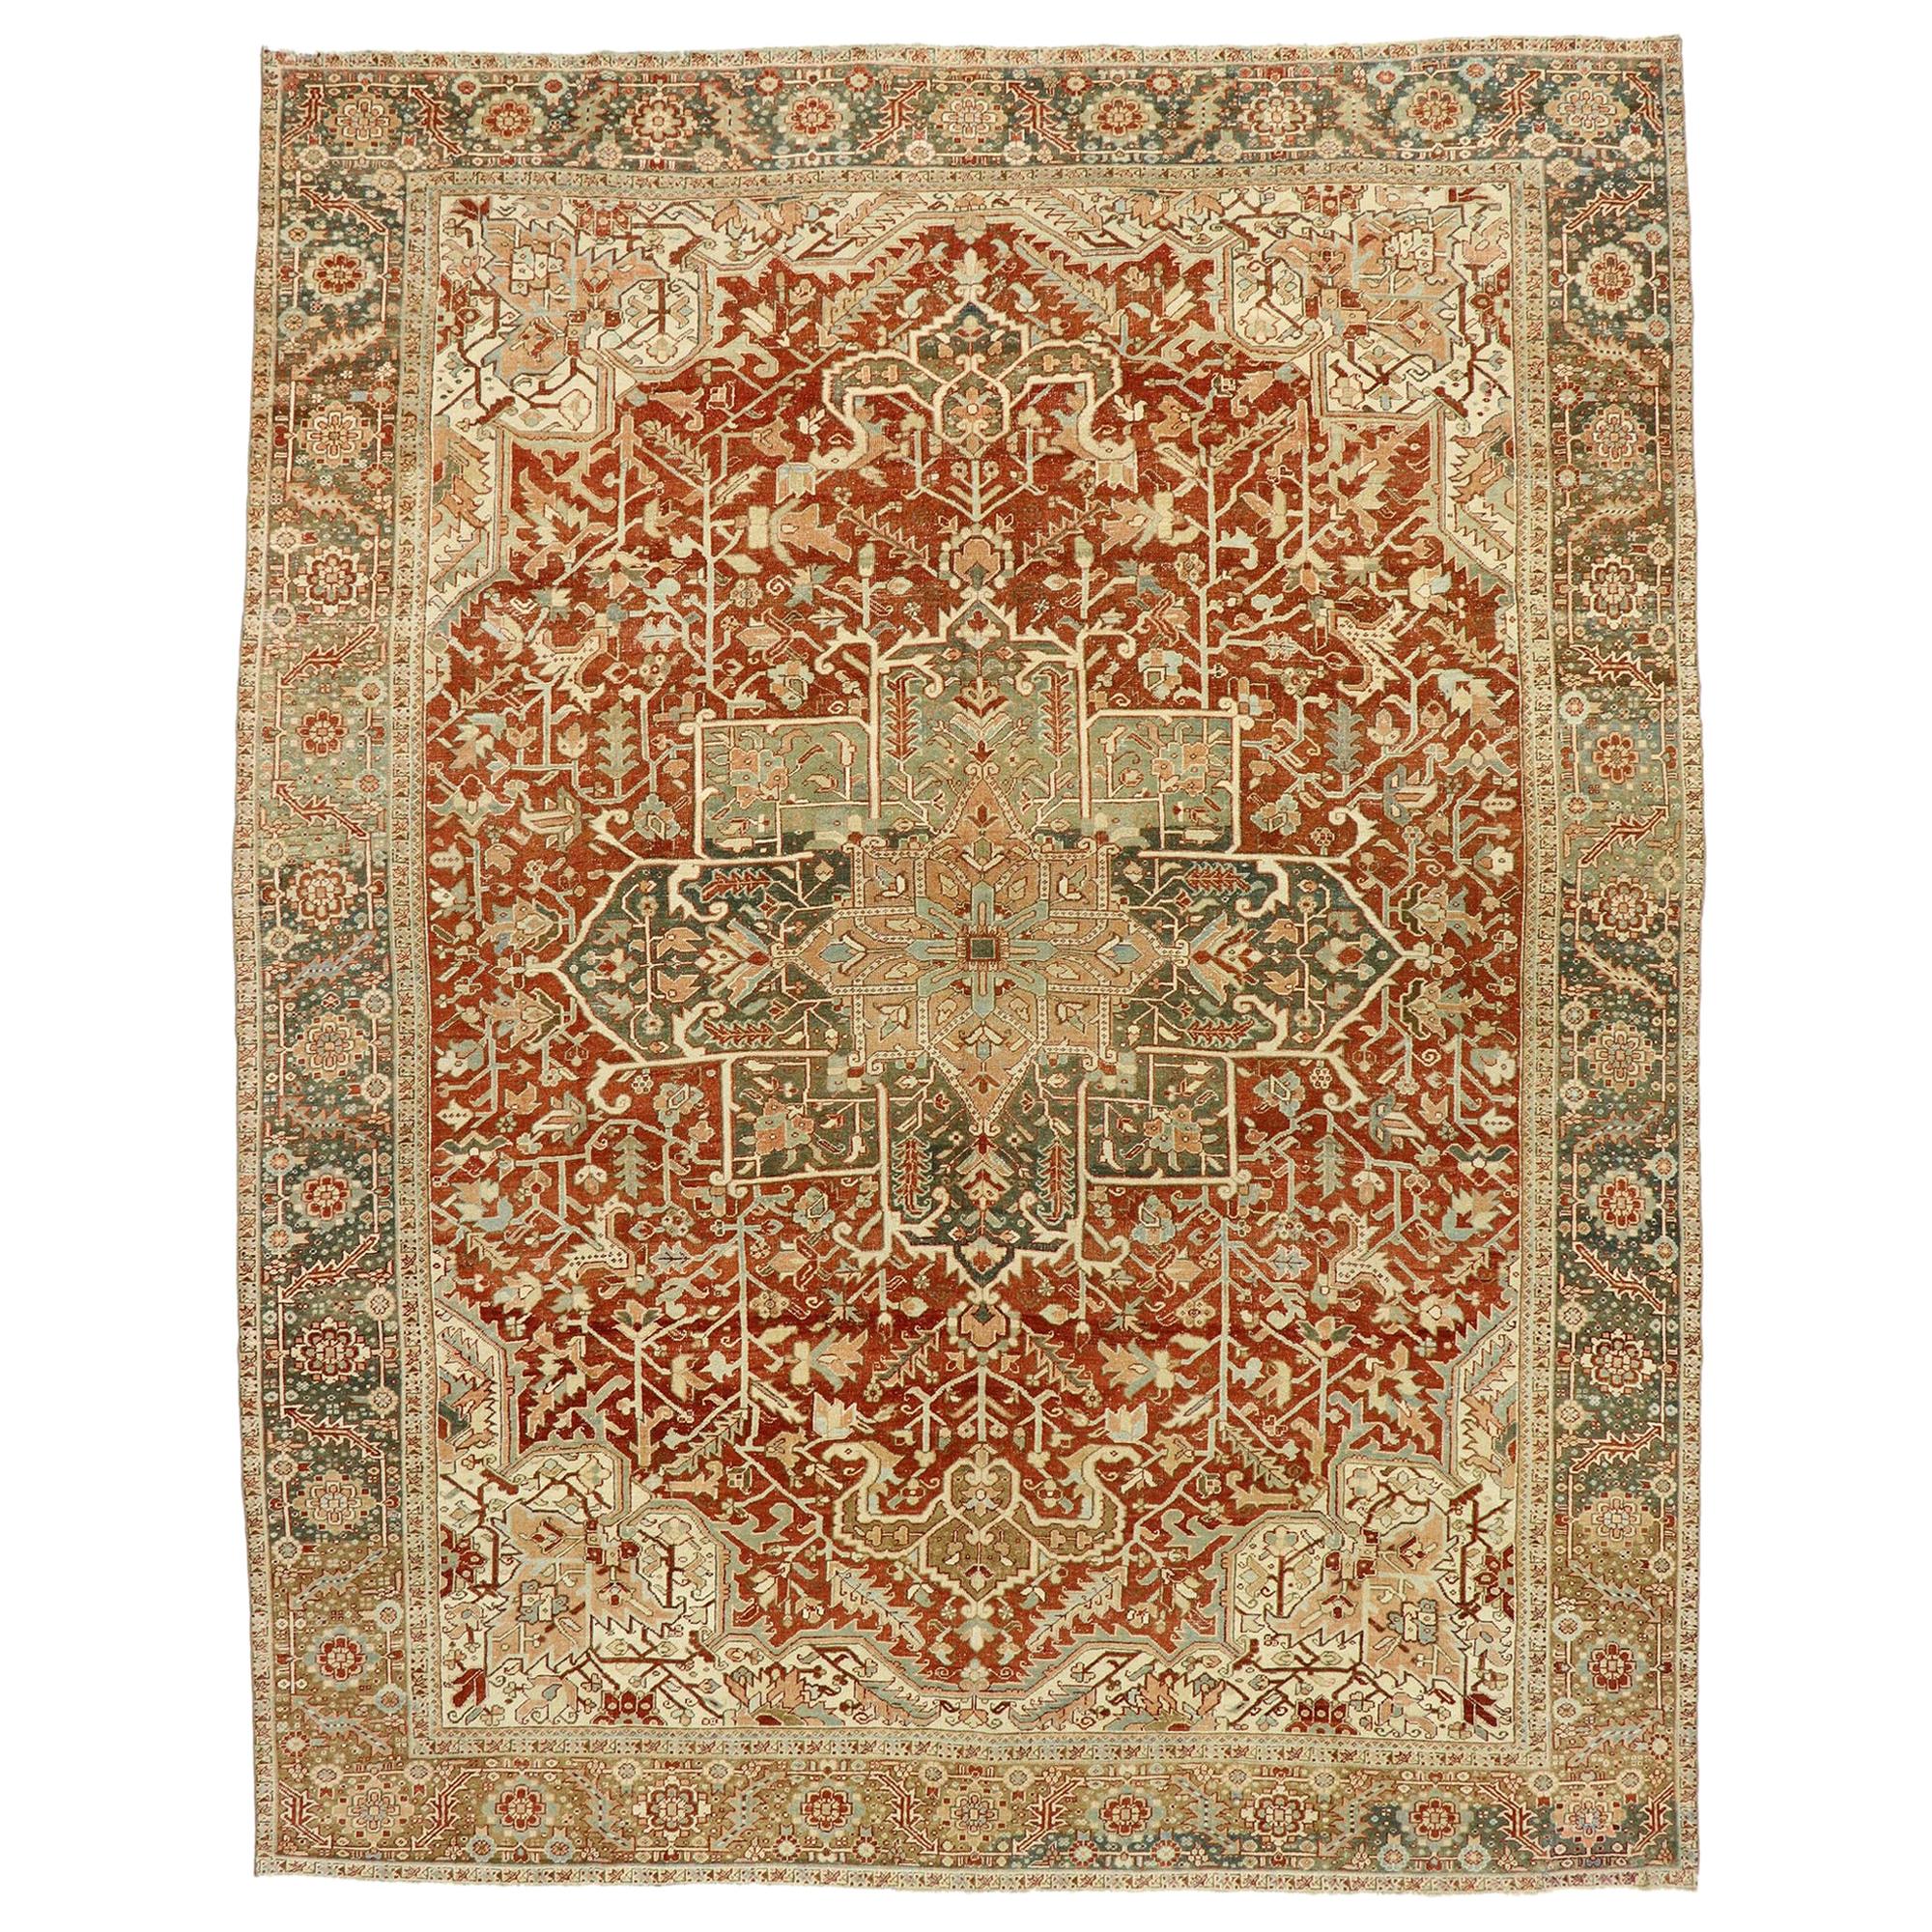 Distressed Antique Persian Heriz Rug with Modern Rustic Bungalow Style